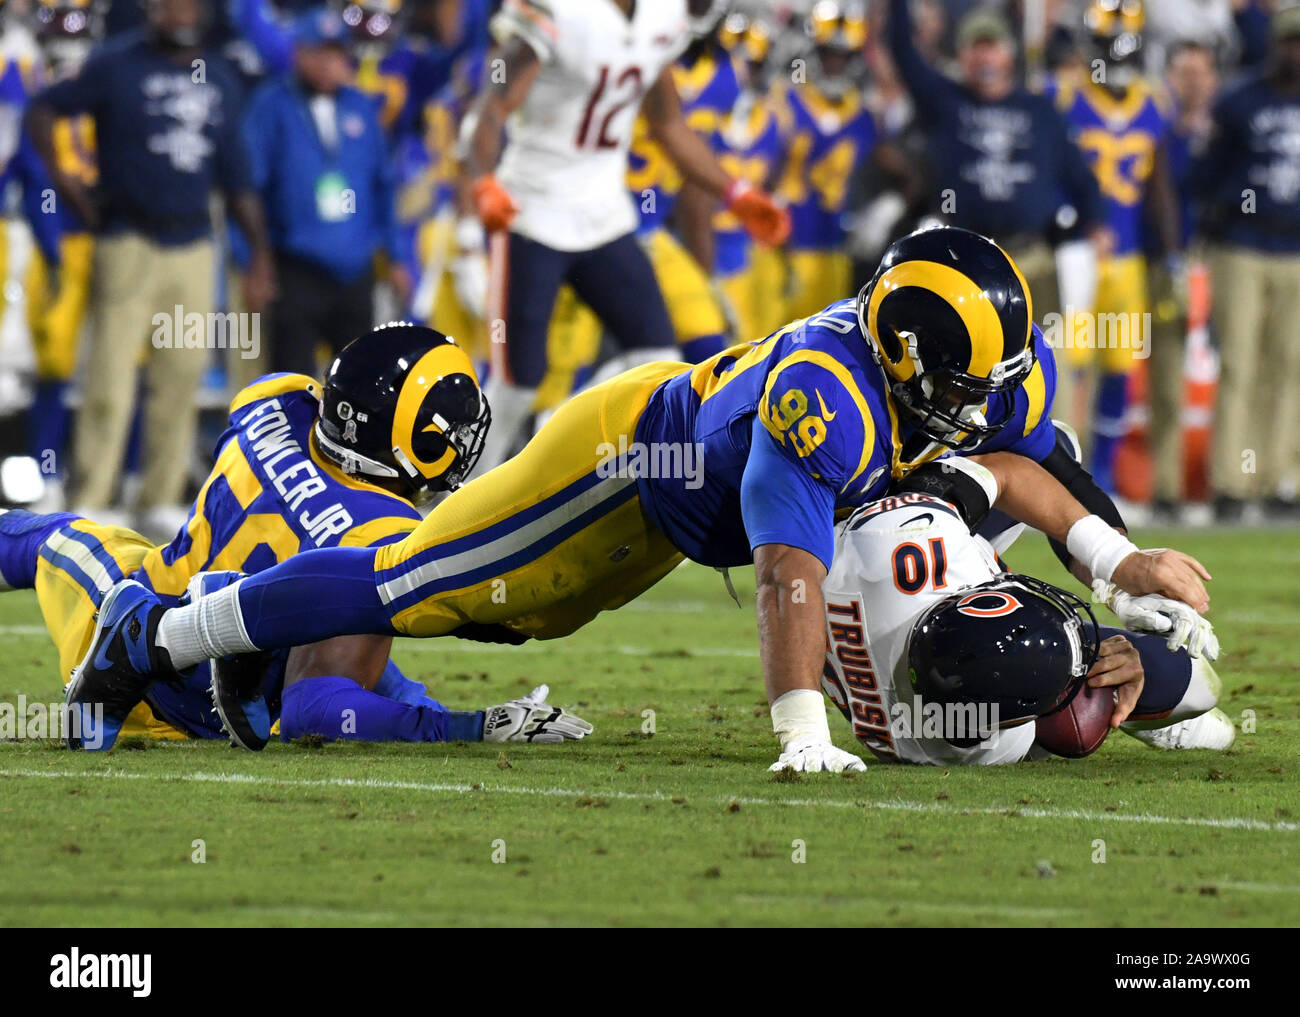 Los Angeles, United States. 17th Nov, 2019. Rams tackle Aaron Donald (99) sacks Bears quarterback Mitchell Turbisky (10) in 3rd quarter action at the United Airlines Coliseum in Los Angeles, November 17, 2019. The Rams defeated the Bears 17-7. Photo by Jon SooHoo/UPI Credit: UPI/Alamy Live News Stock Photo